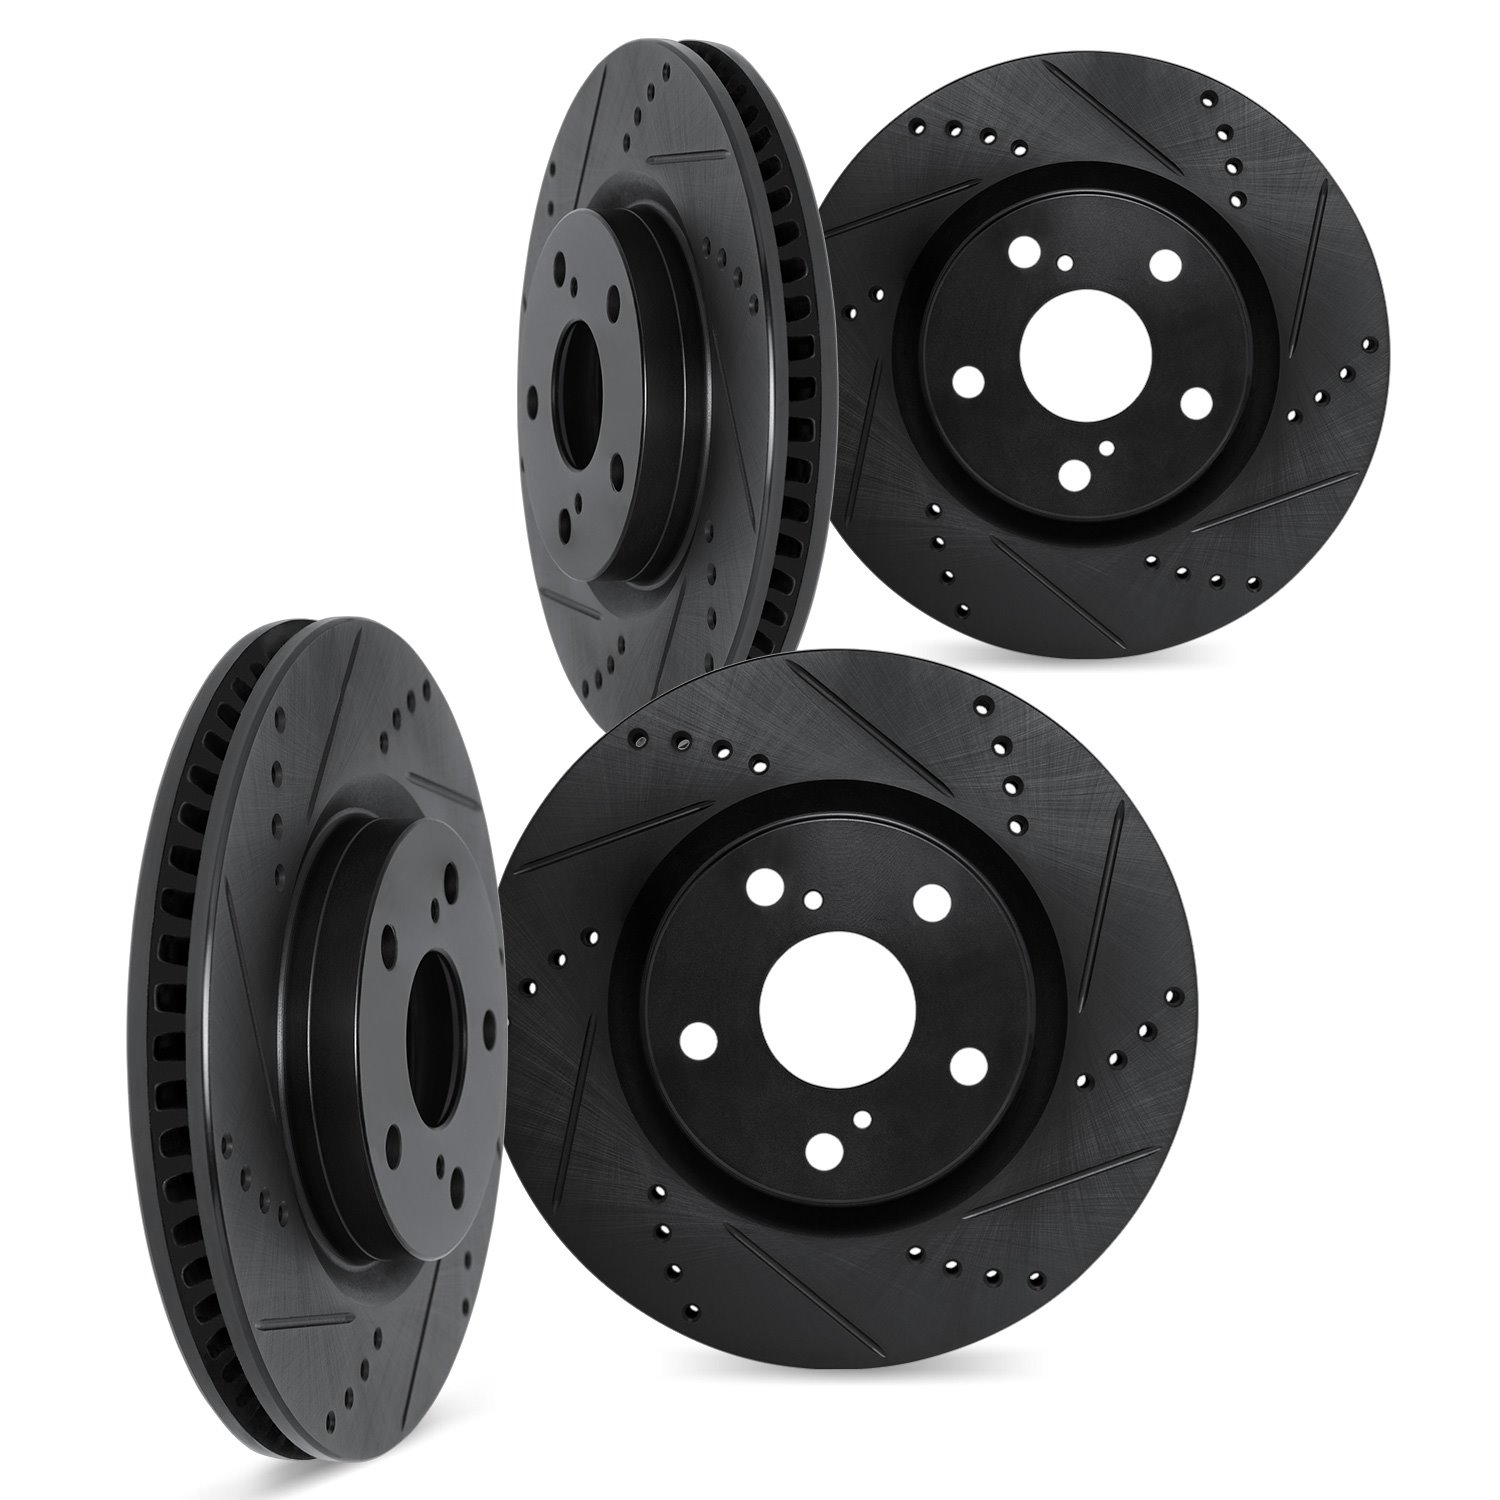 8004-11006 Drilled/Slotted Brake Rotors [Black], 2014-2017 Land Rover, Position: Front and Rear